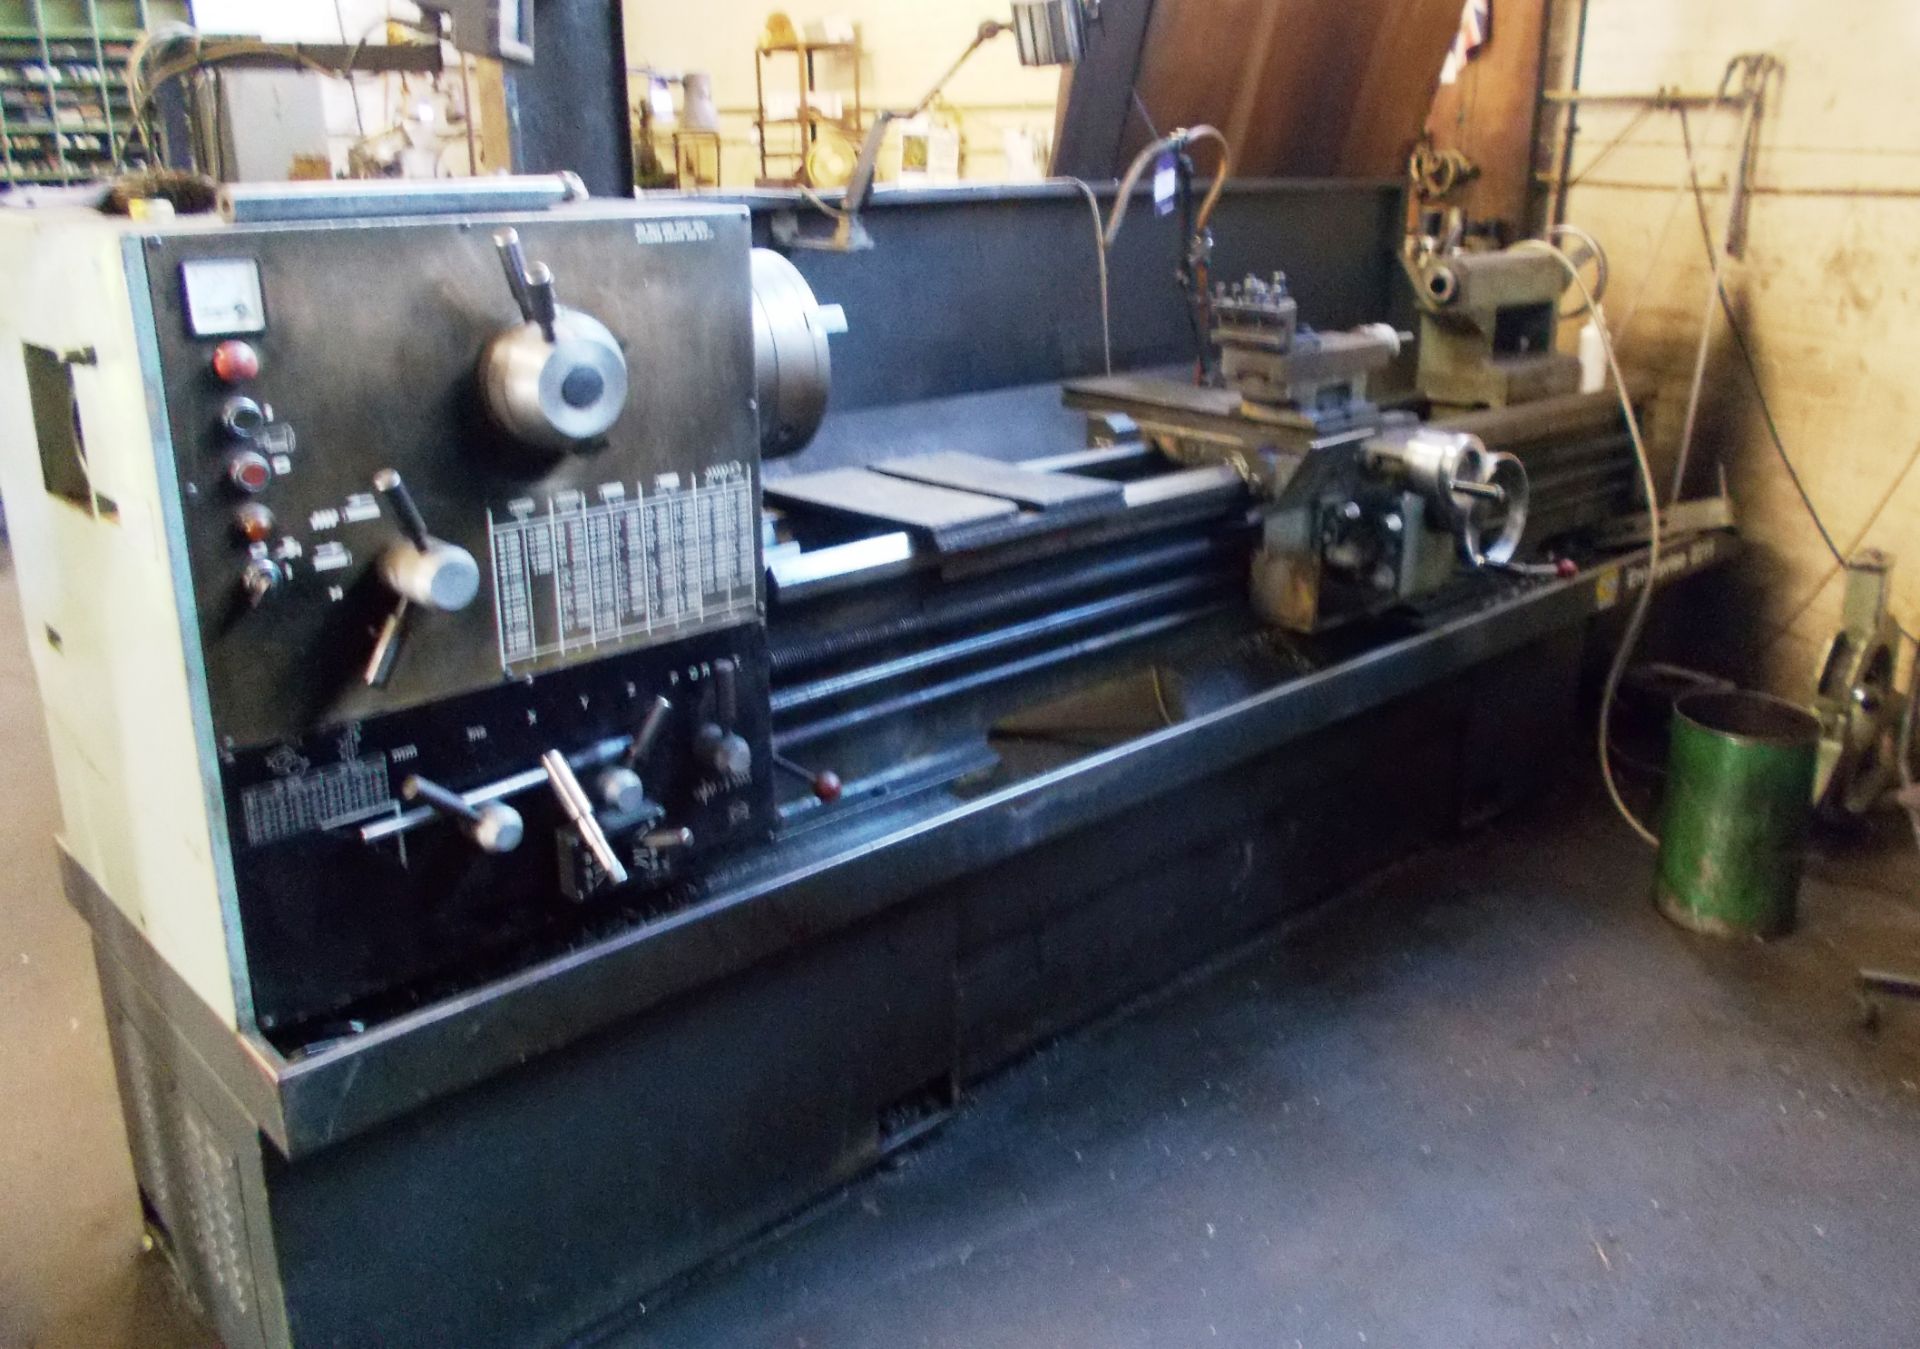 Enterpirse 2215 EP2215 centre lathe (Serial Number: 8520EP739, Year: 1995) with quick release tool